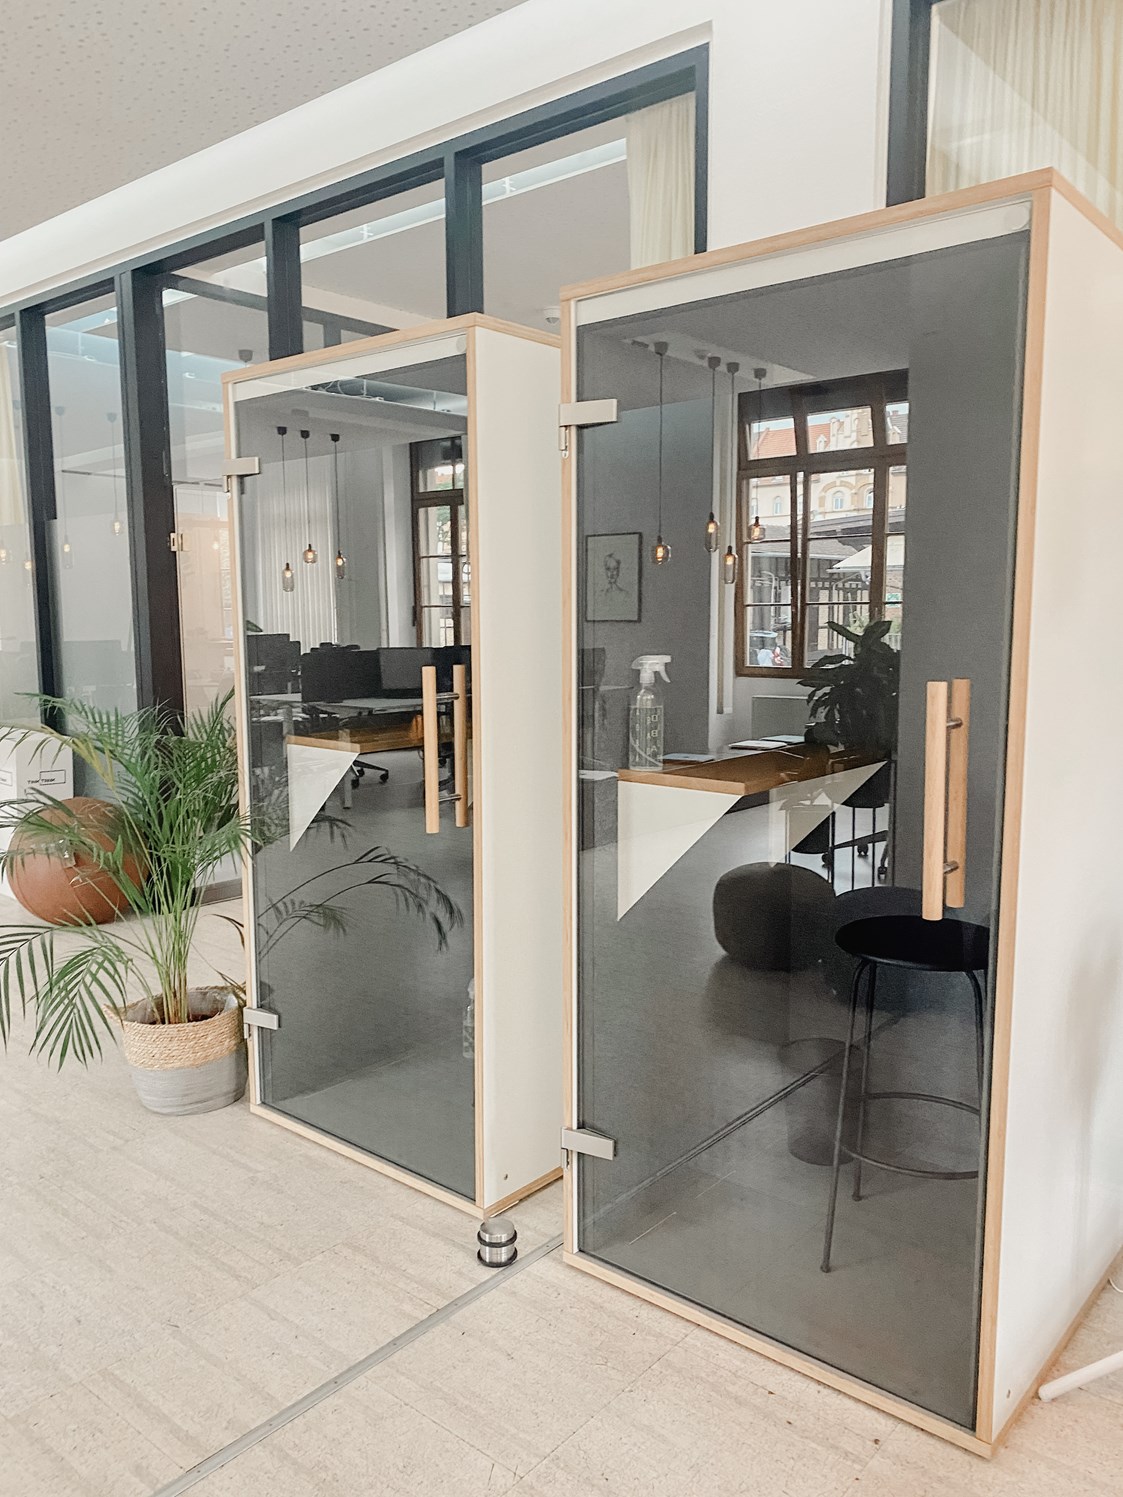 Coworking Space: Tink Tank Spaces - Landfried